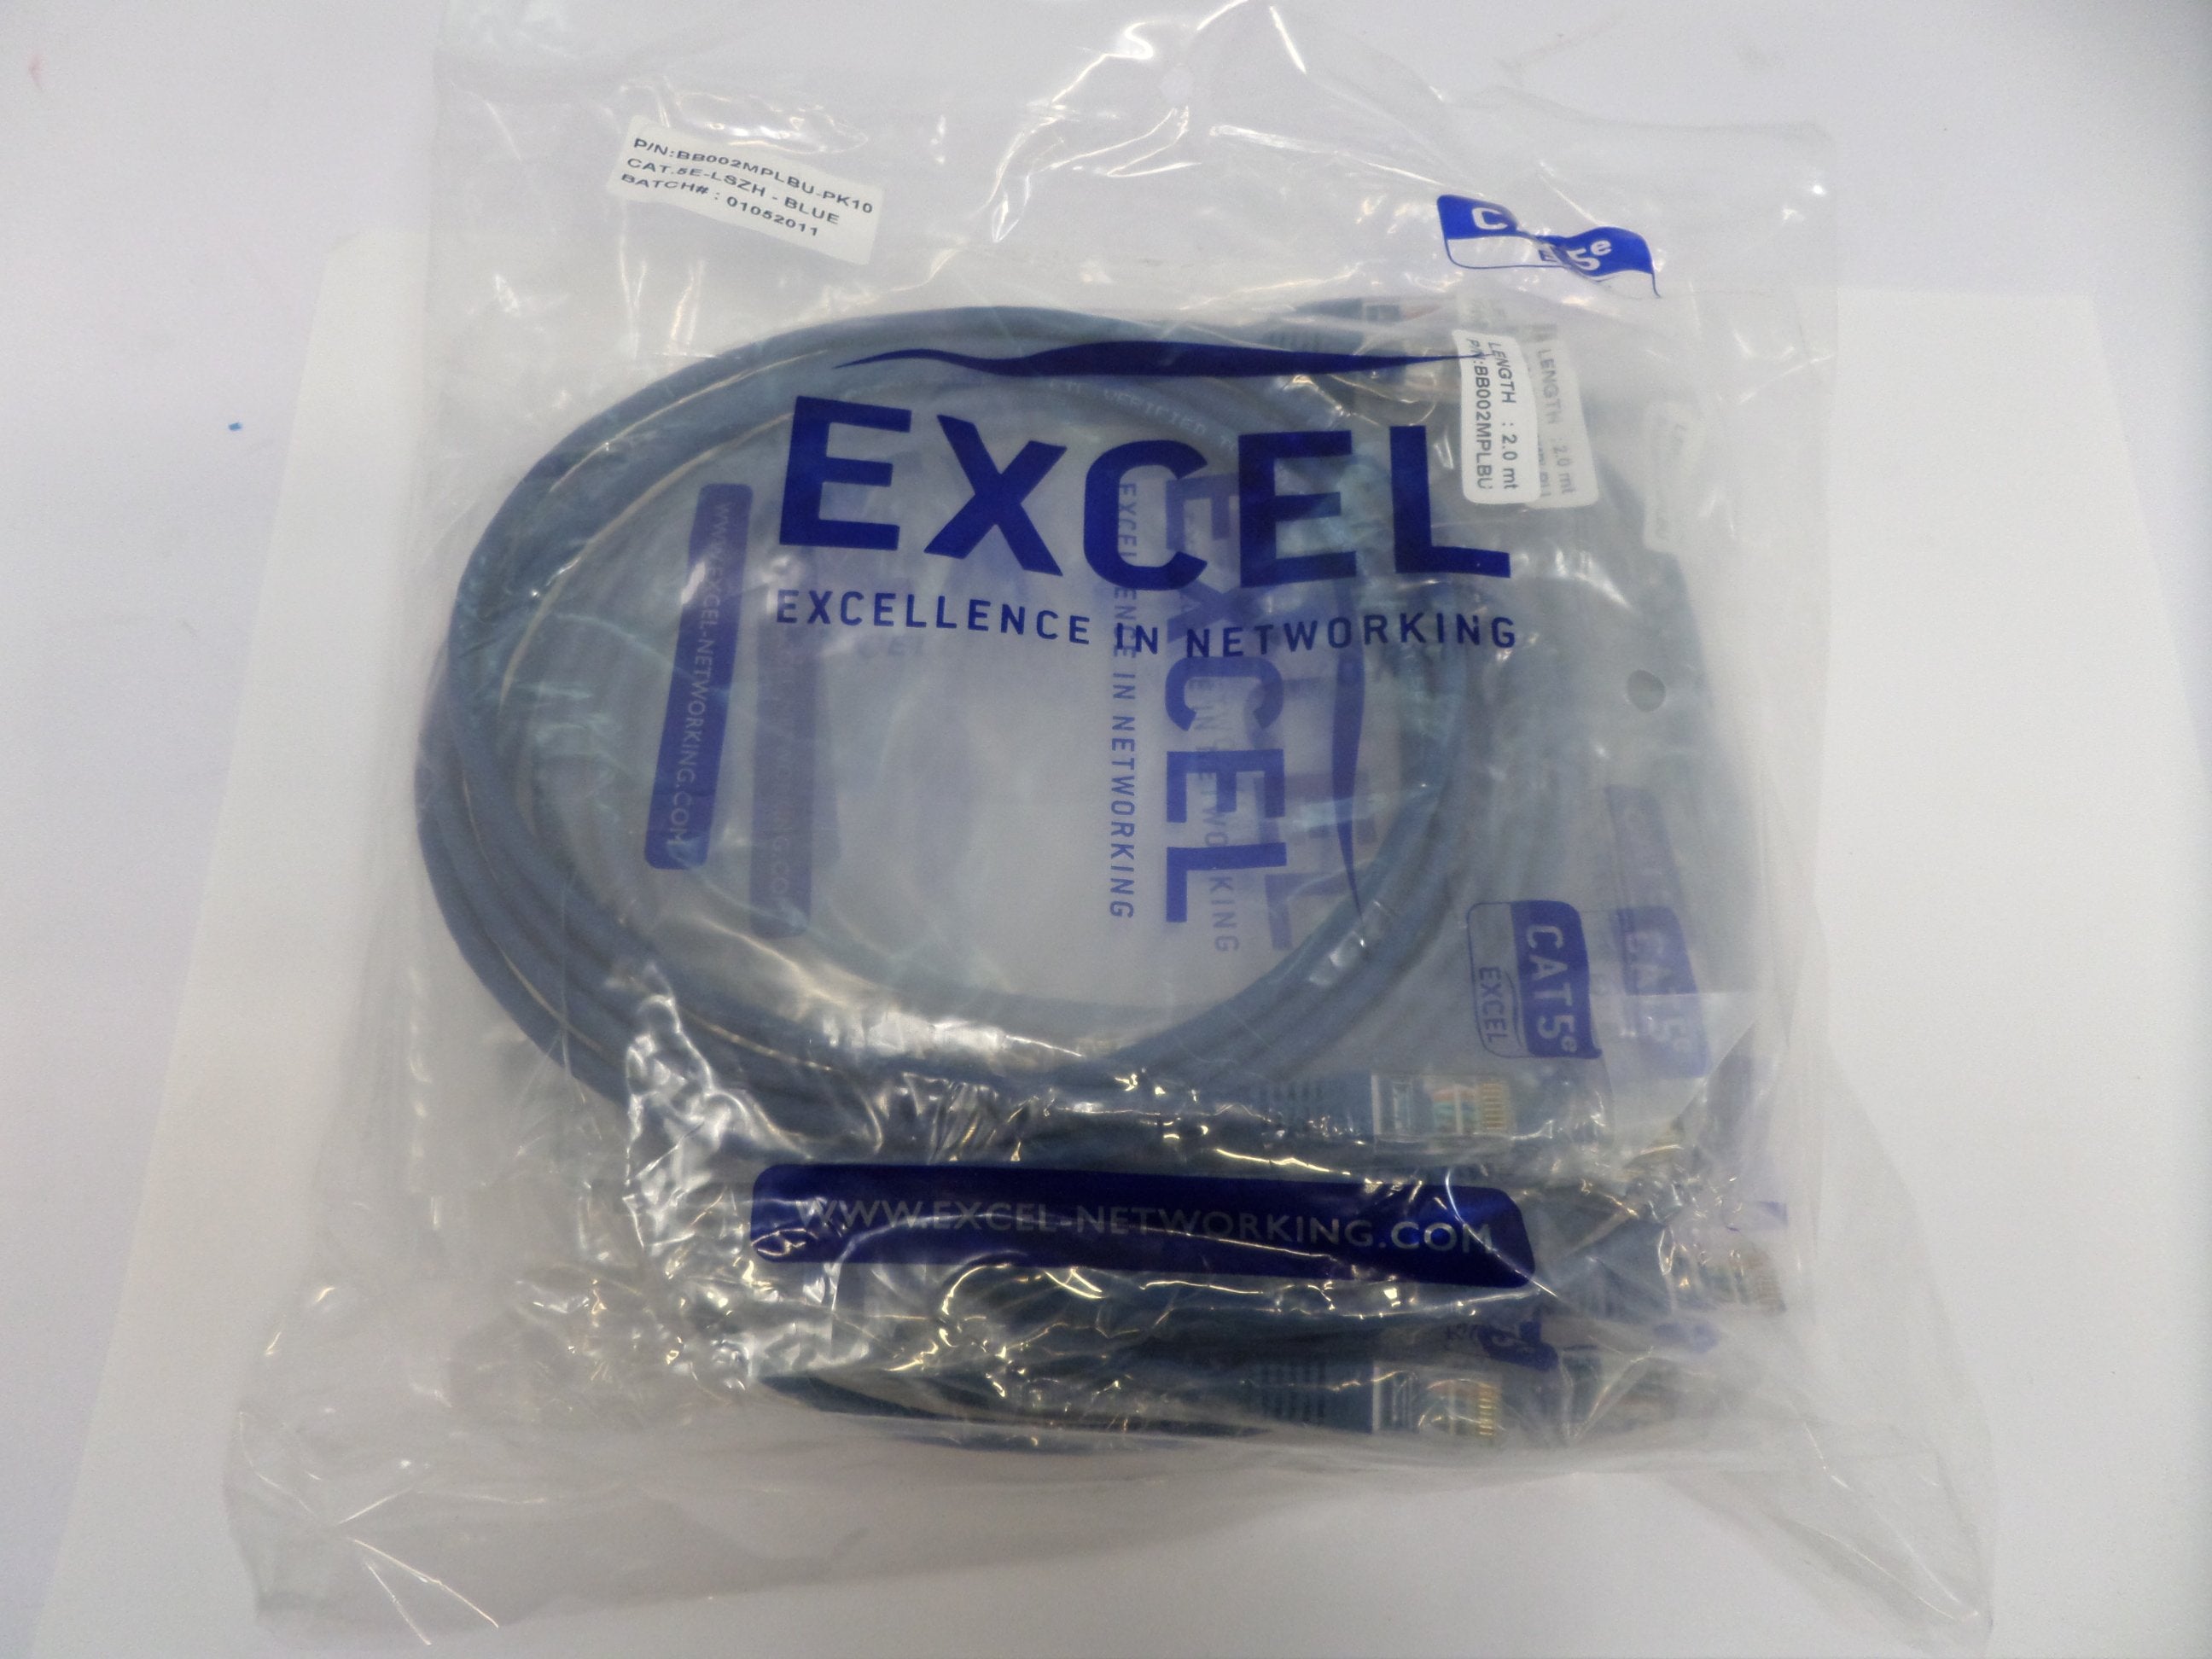 BB002MPLBU - Excel CAT5.e Blue 2.0m Patch Cable (Pack of 10) - NEW